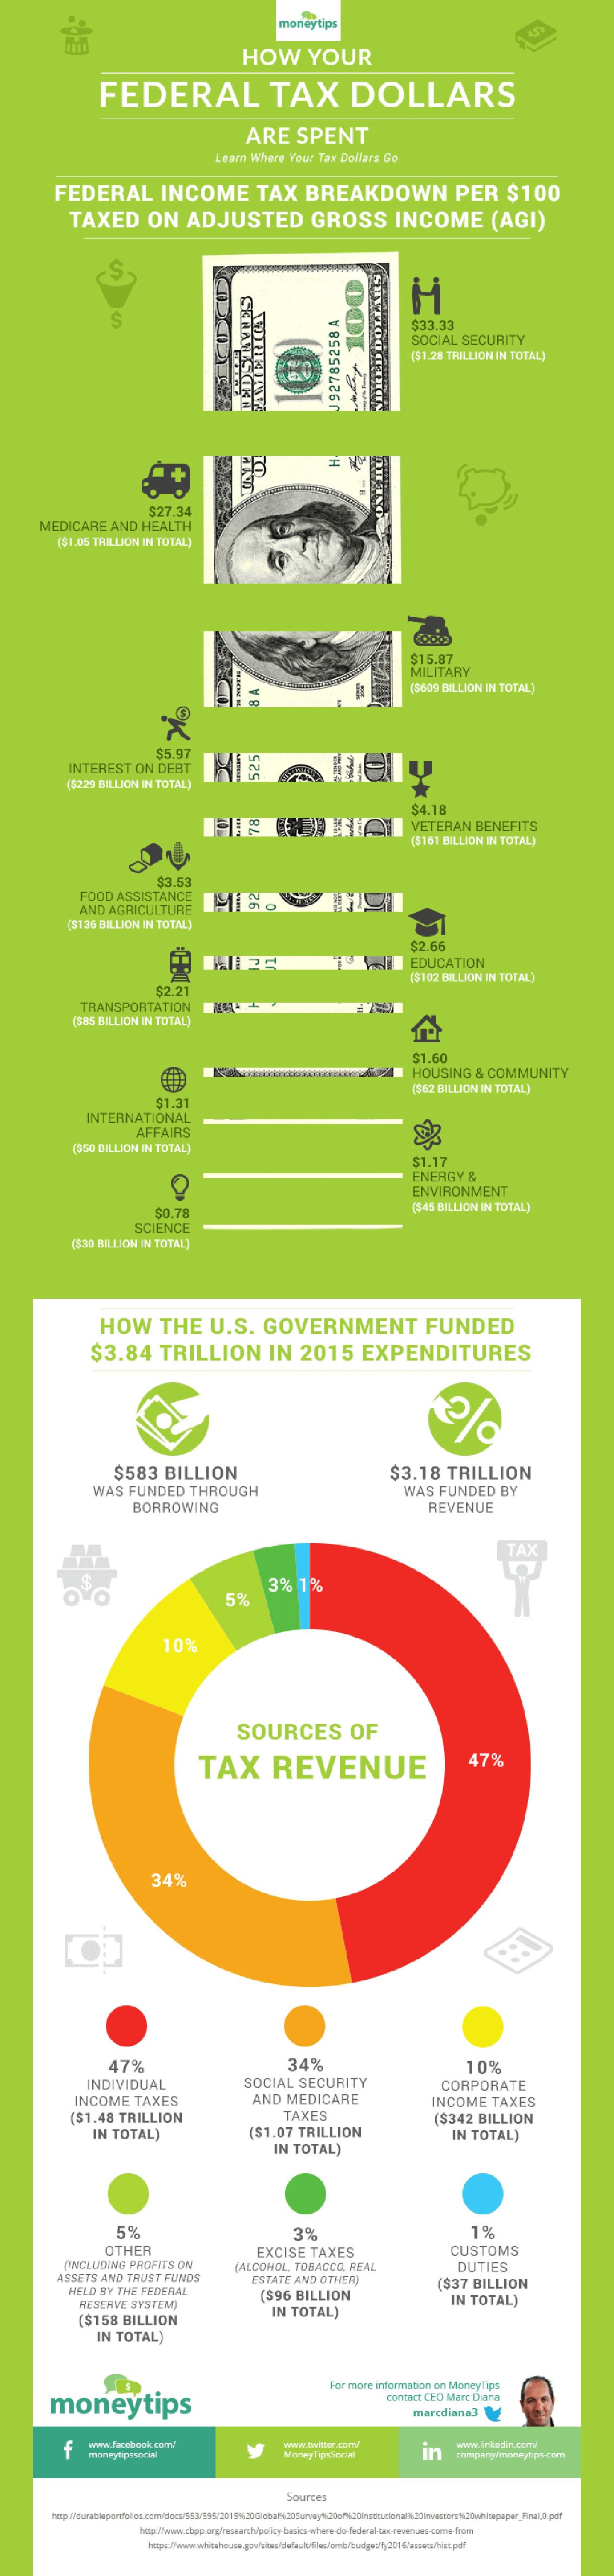 How Your Federal Tax Dollars are Spent Infographic